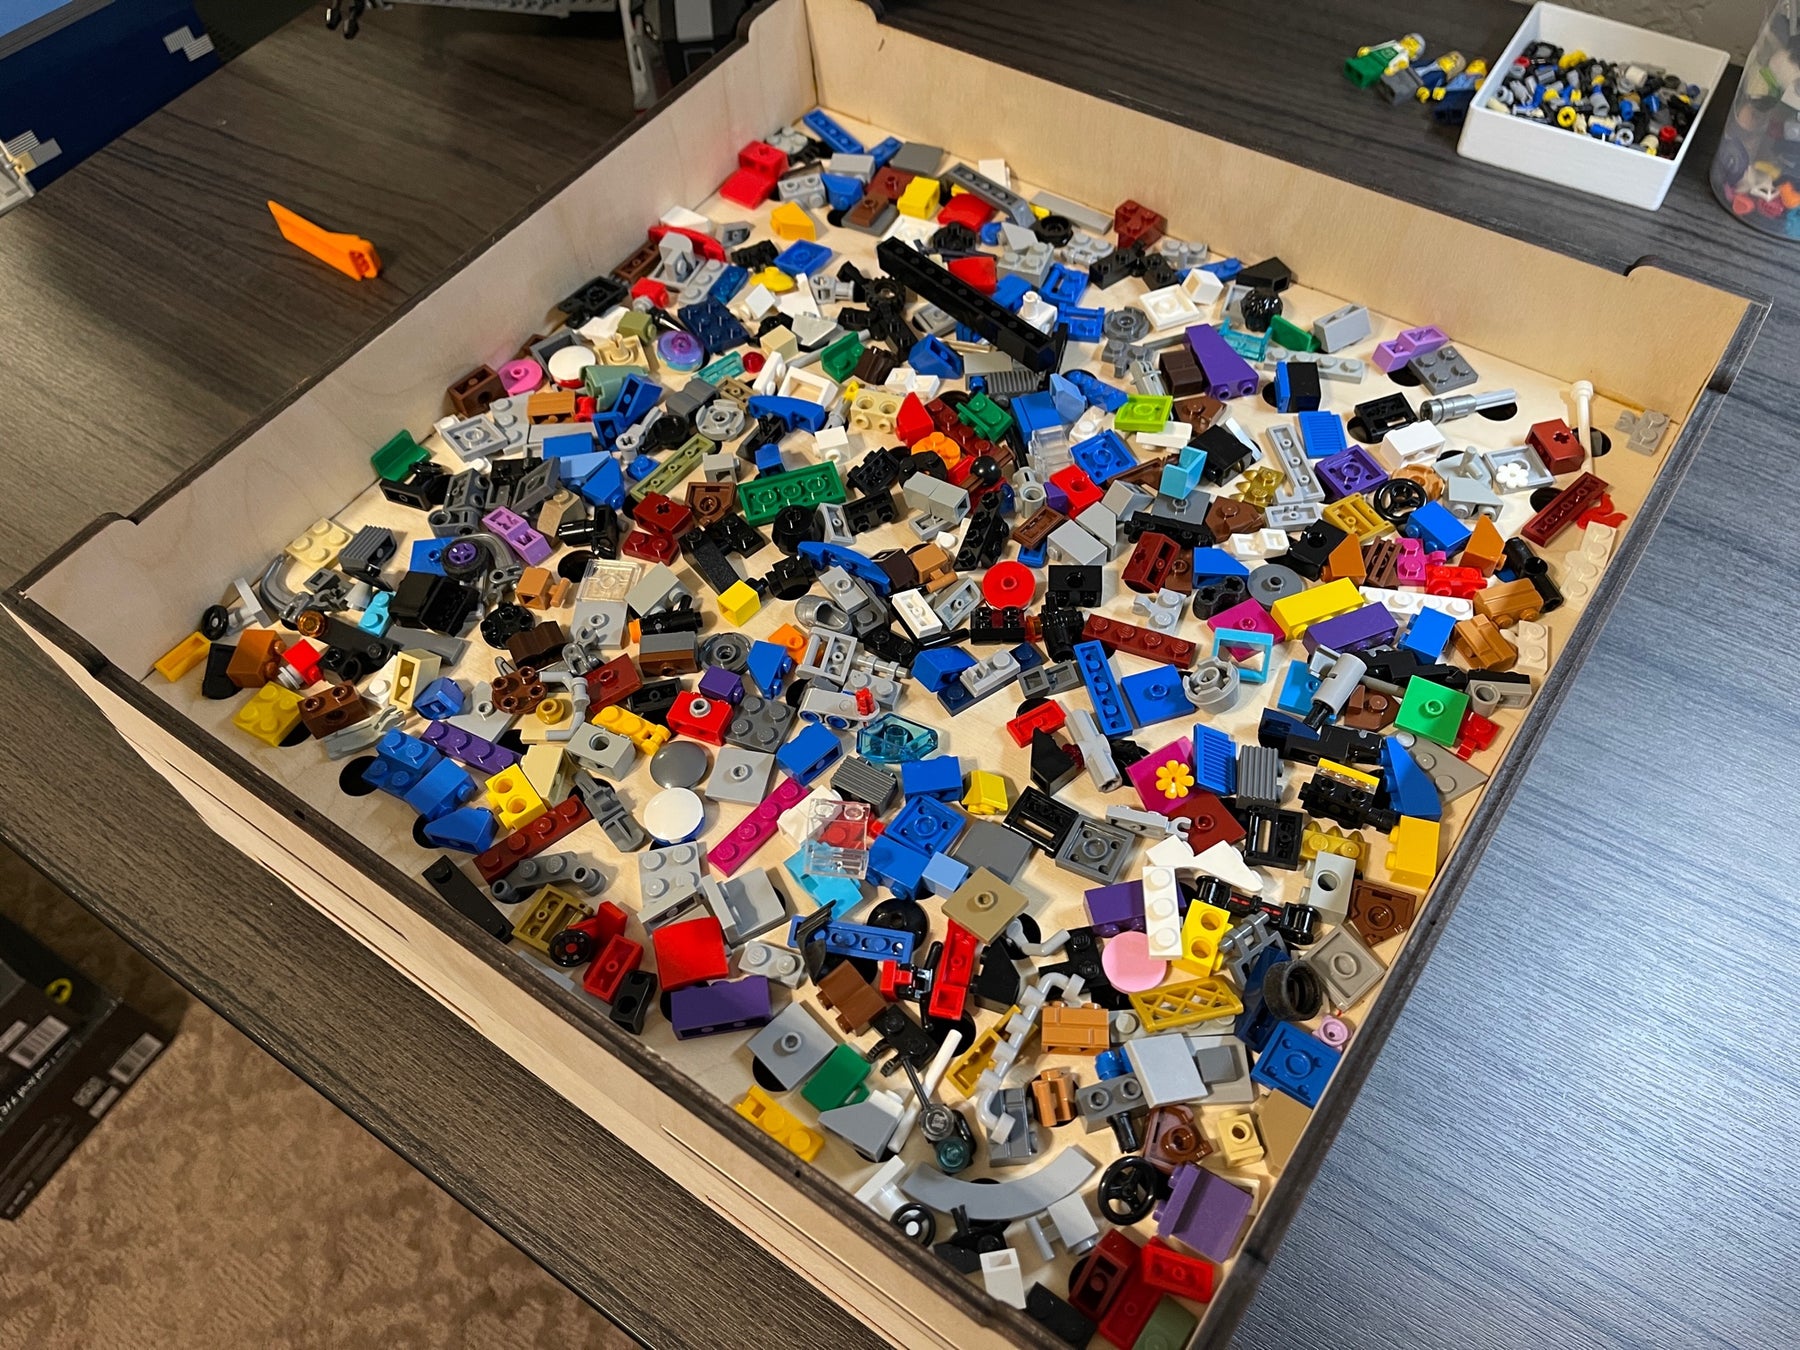 Check Out This Ultimate LEGO Sorter Link in the Description 